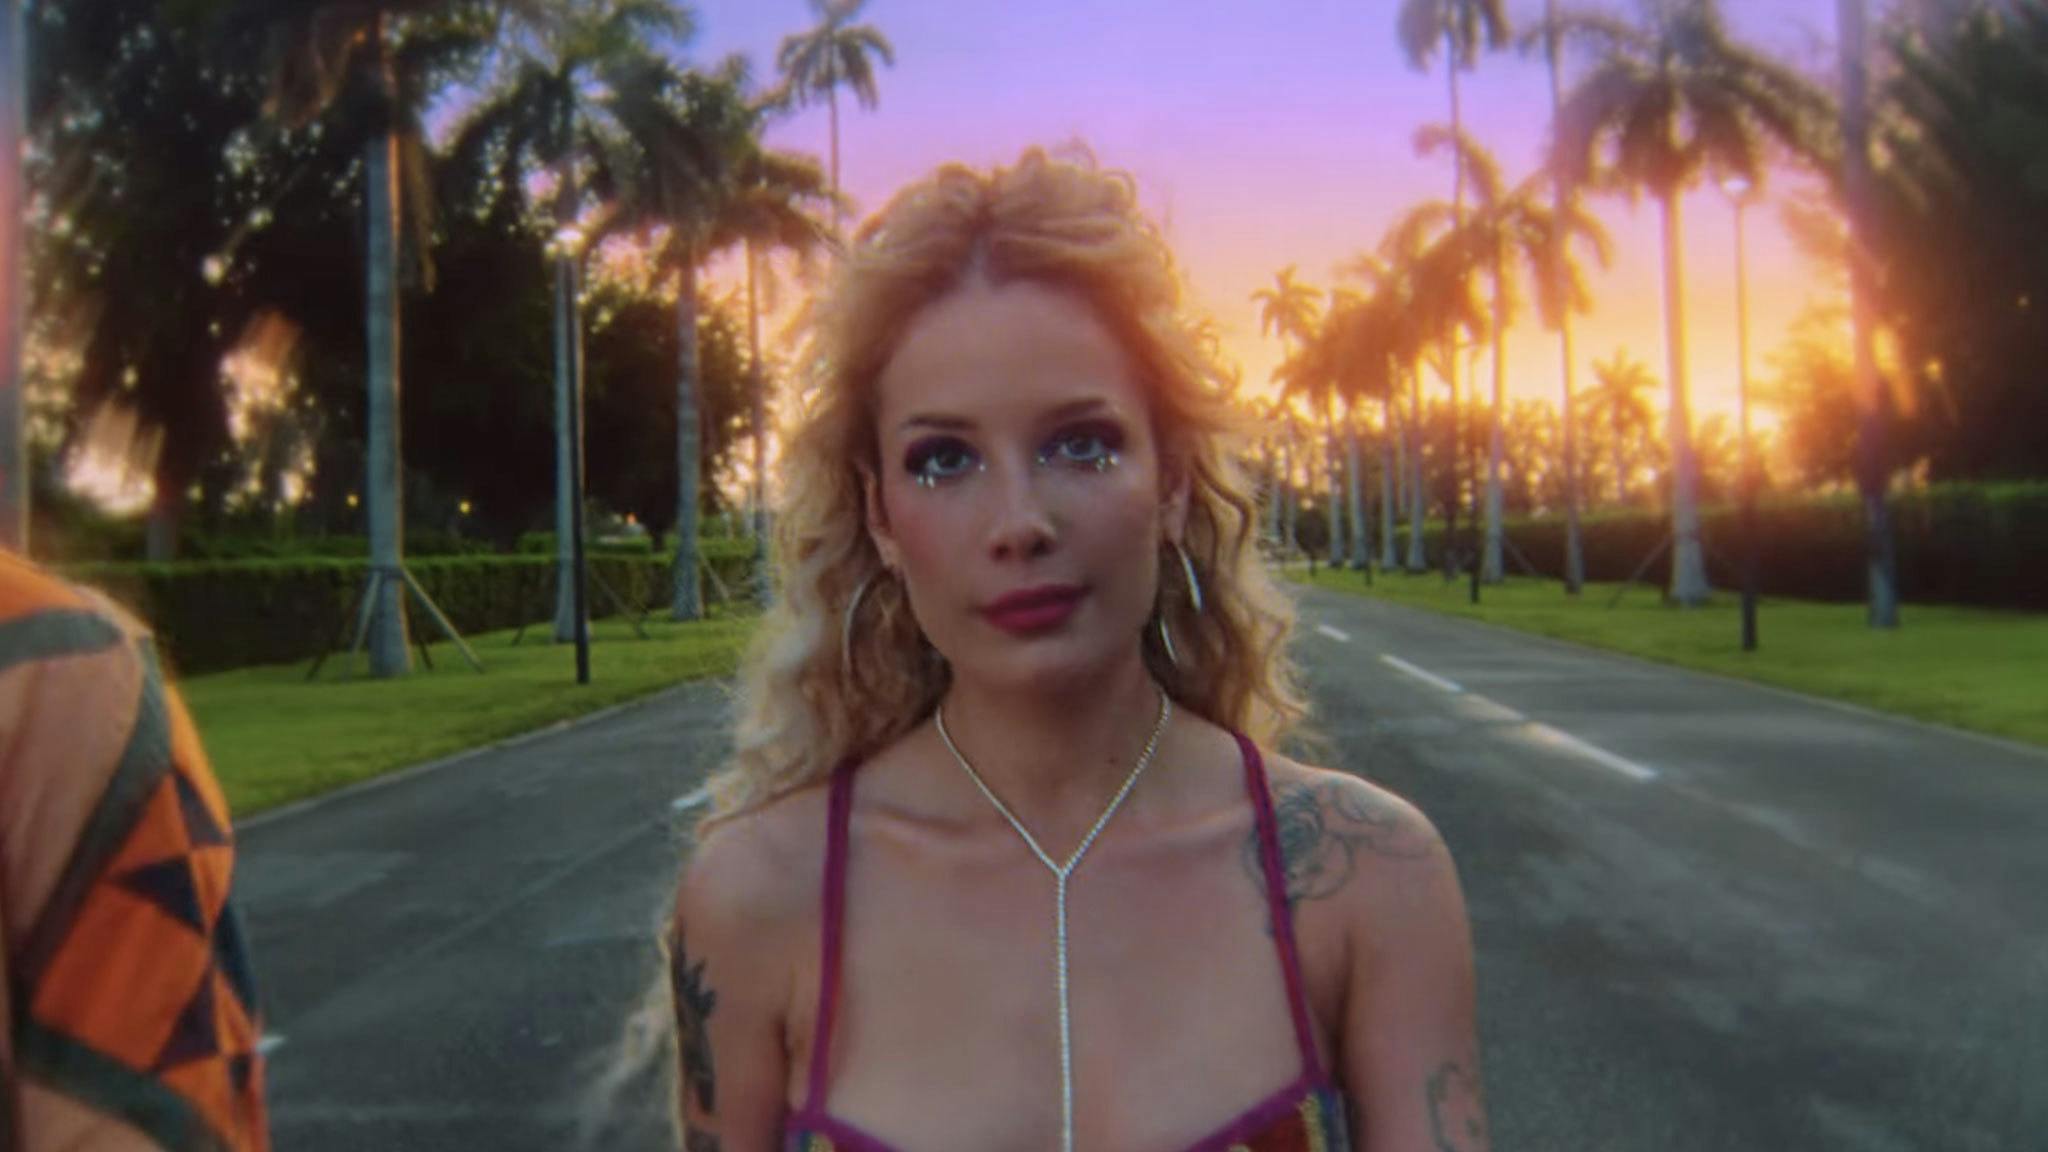 Listen to Halsey’s feature on Calvin Harris’ new disco track Stay With Me